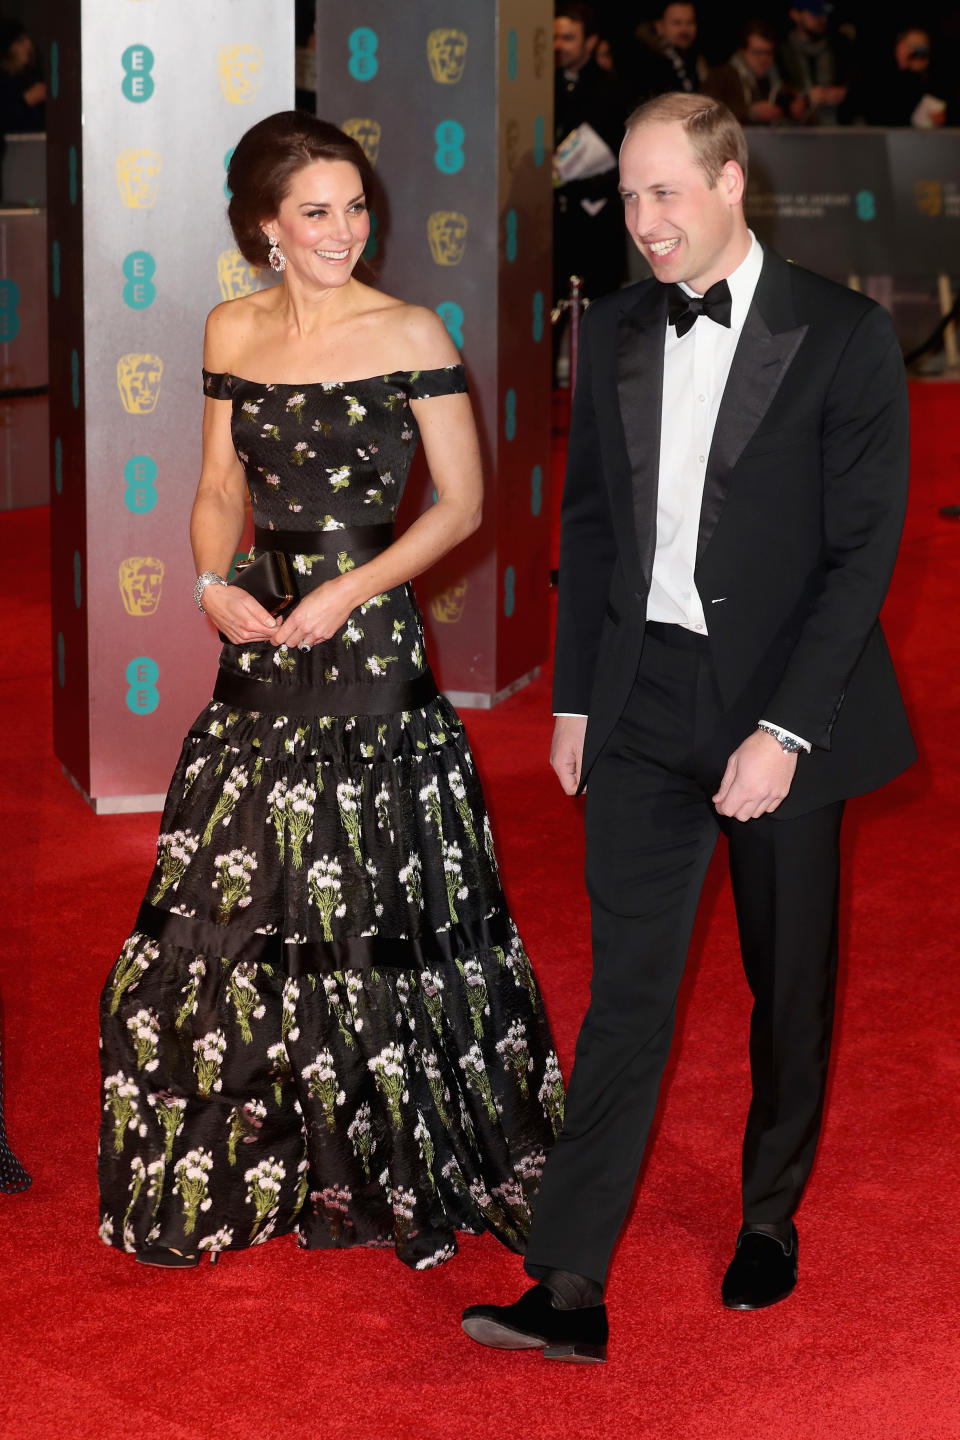 Duke and Duchess of Cambridge at the BAFTA Awards in London in 2017